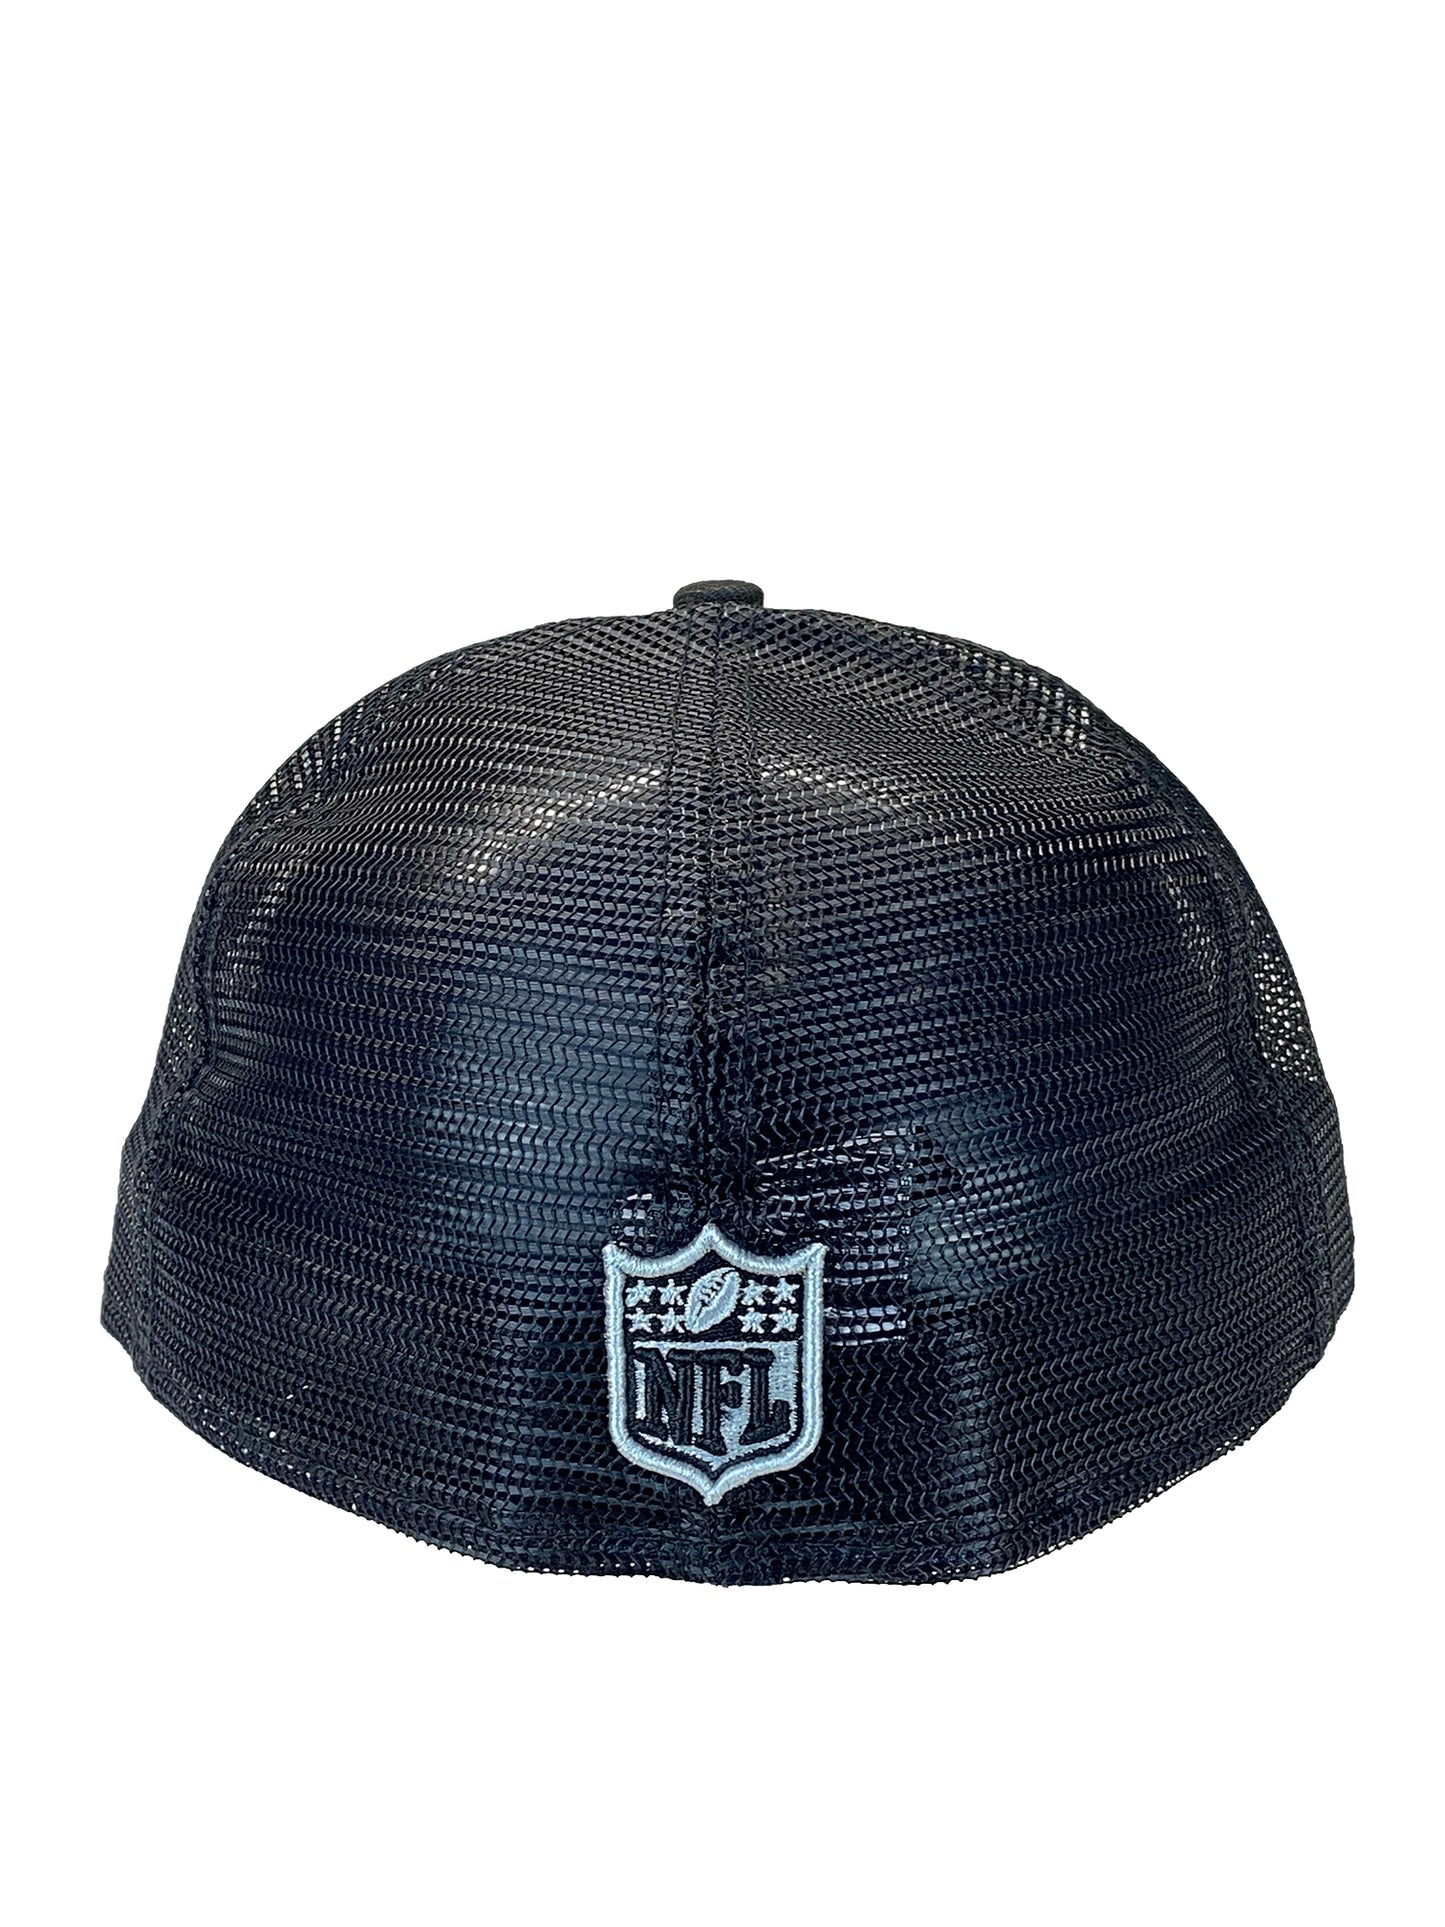 LAS VEGAS RAIDERS CLASSIC TRUCKER 59FIFTY FITTED